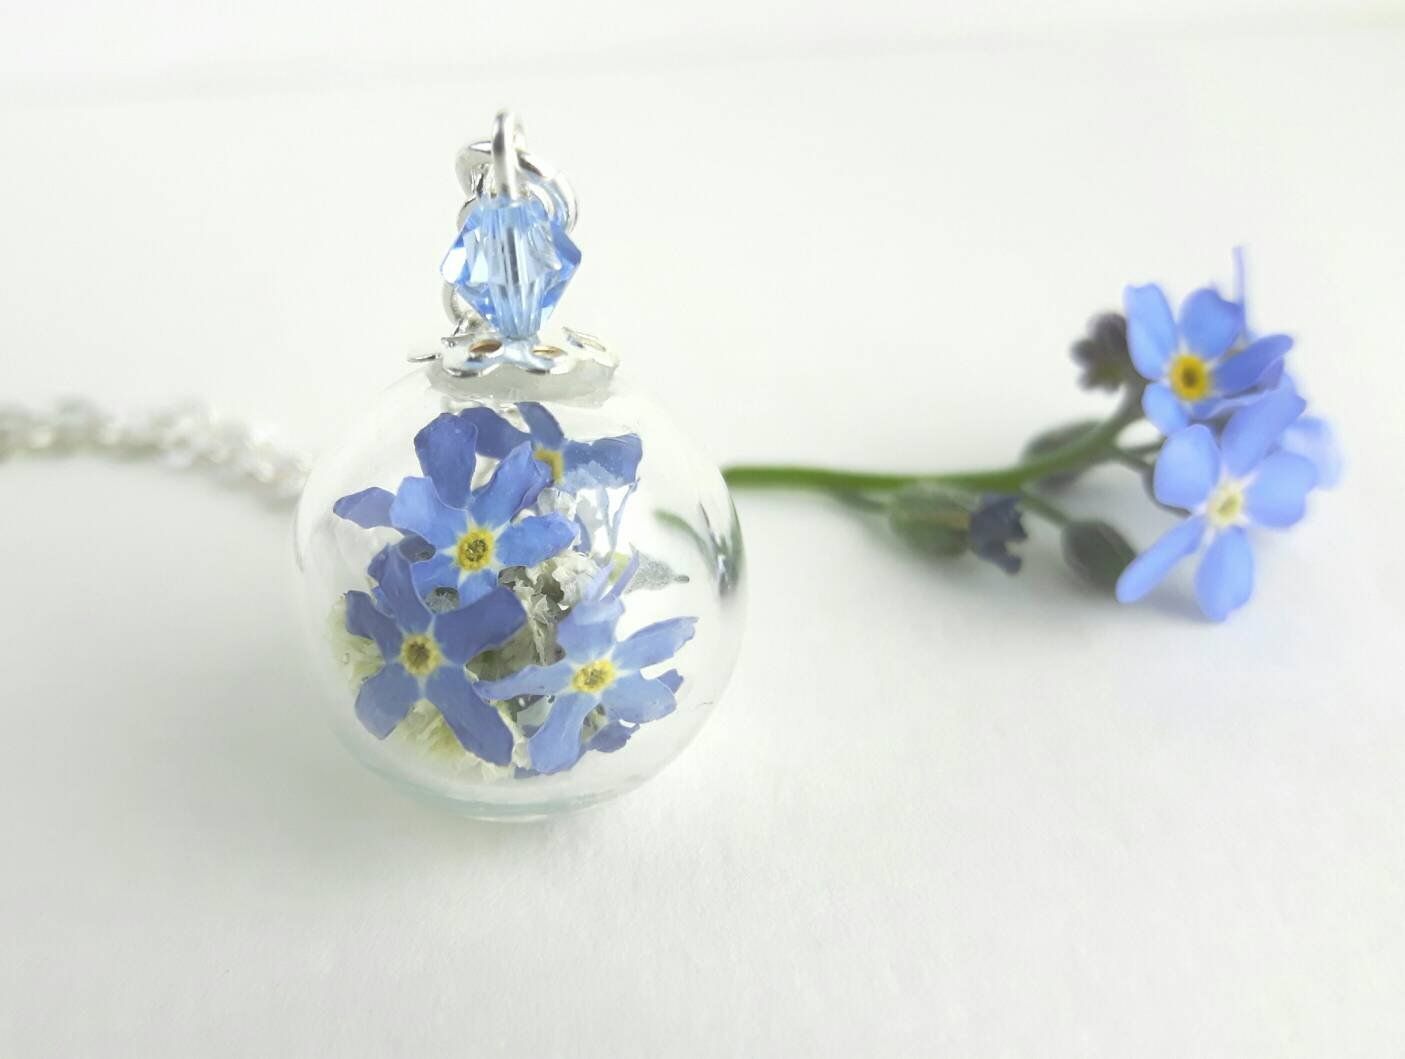 Forget Me Not Flower Necklace Intended For Newest Forget Me Not Necklaces (View 14 of 25)